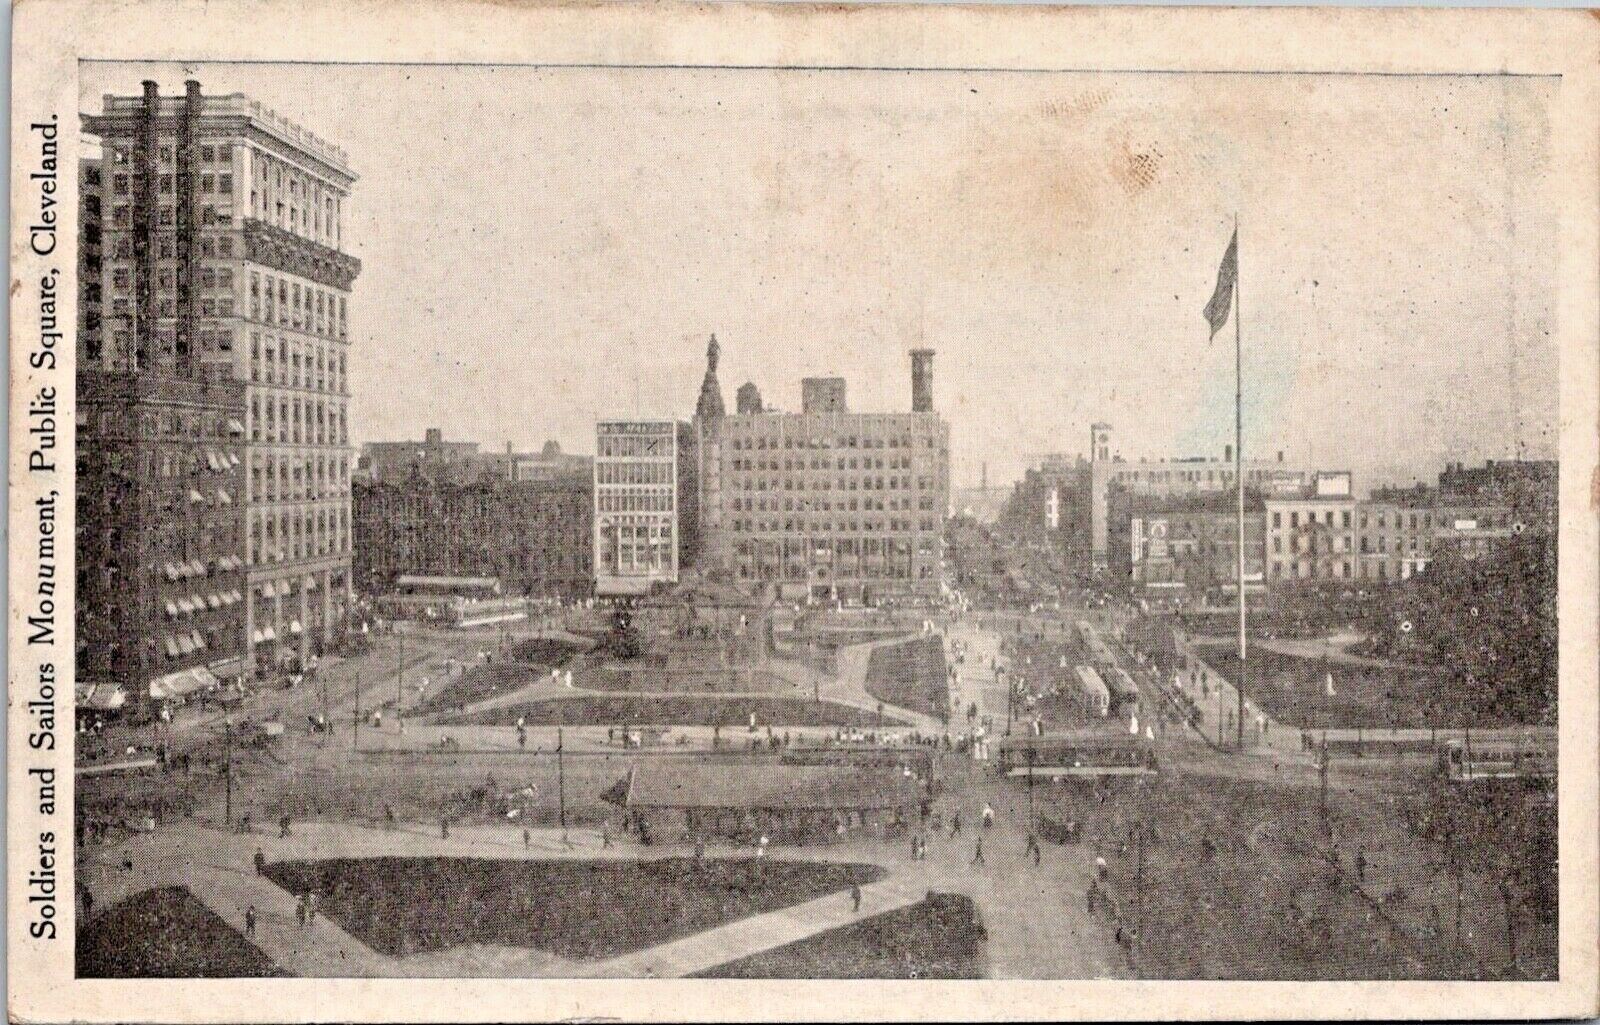 Postcard 1901-1907 Cleveland, Ohio PUBLIC SQUARE Undivided Back b/w areal view